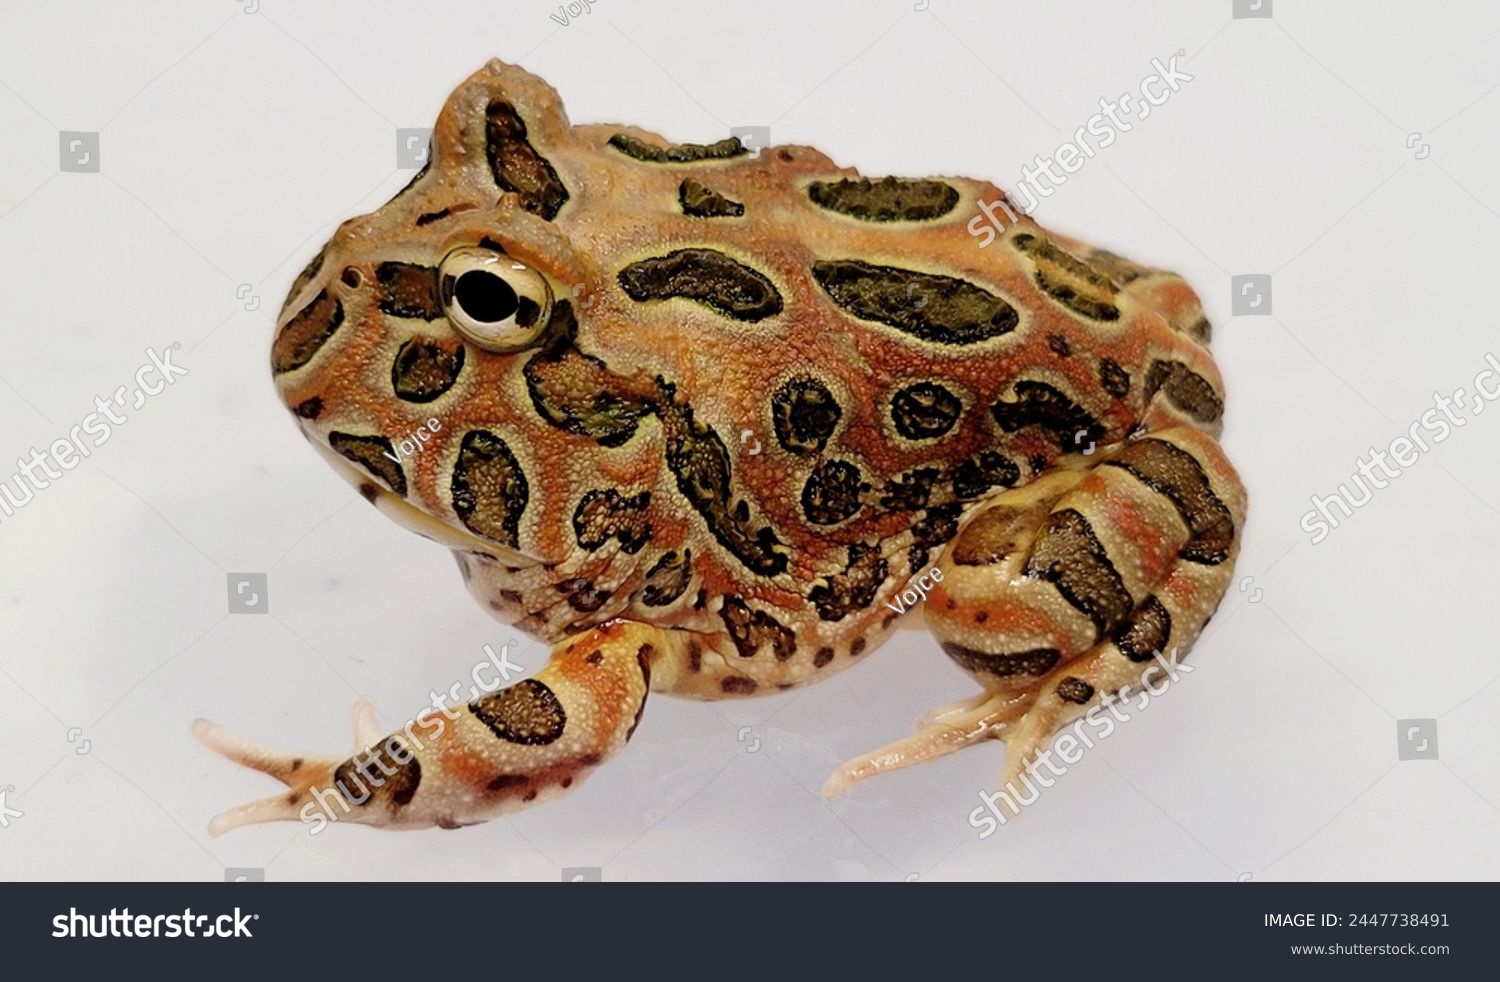 Pacman Frog is South American horned frogs, from genus Ceratophrys #2447738491